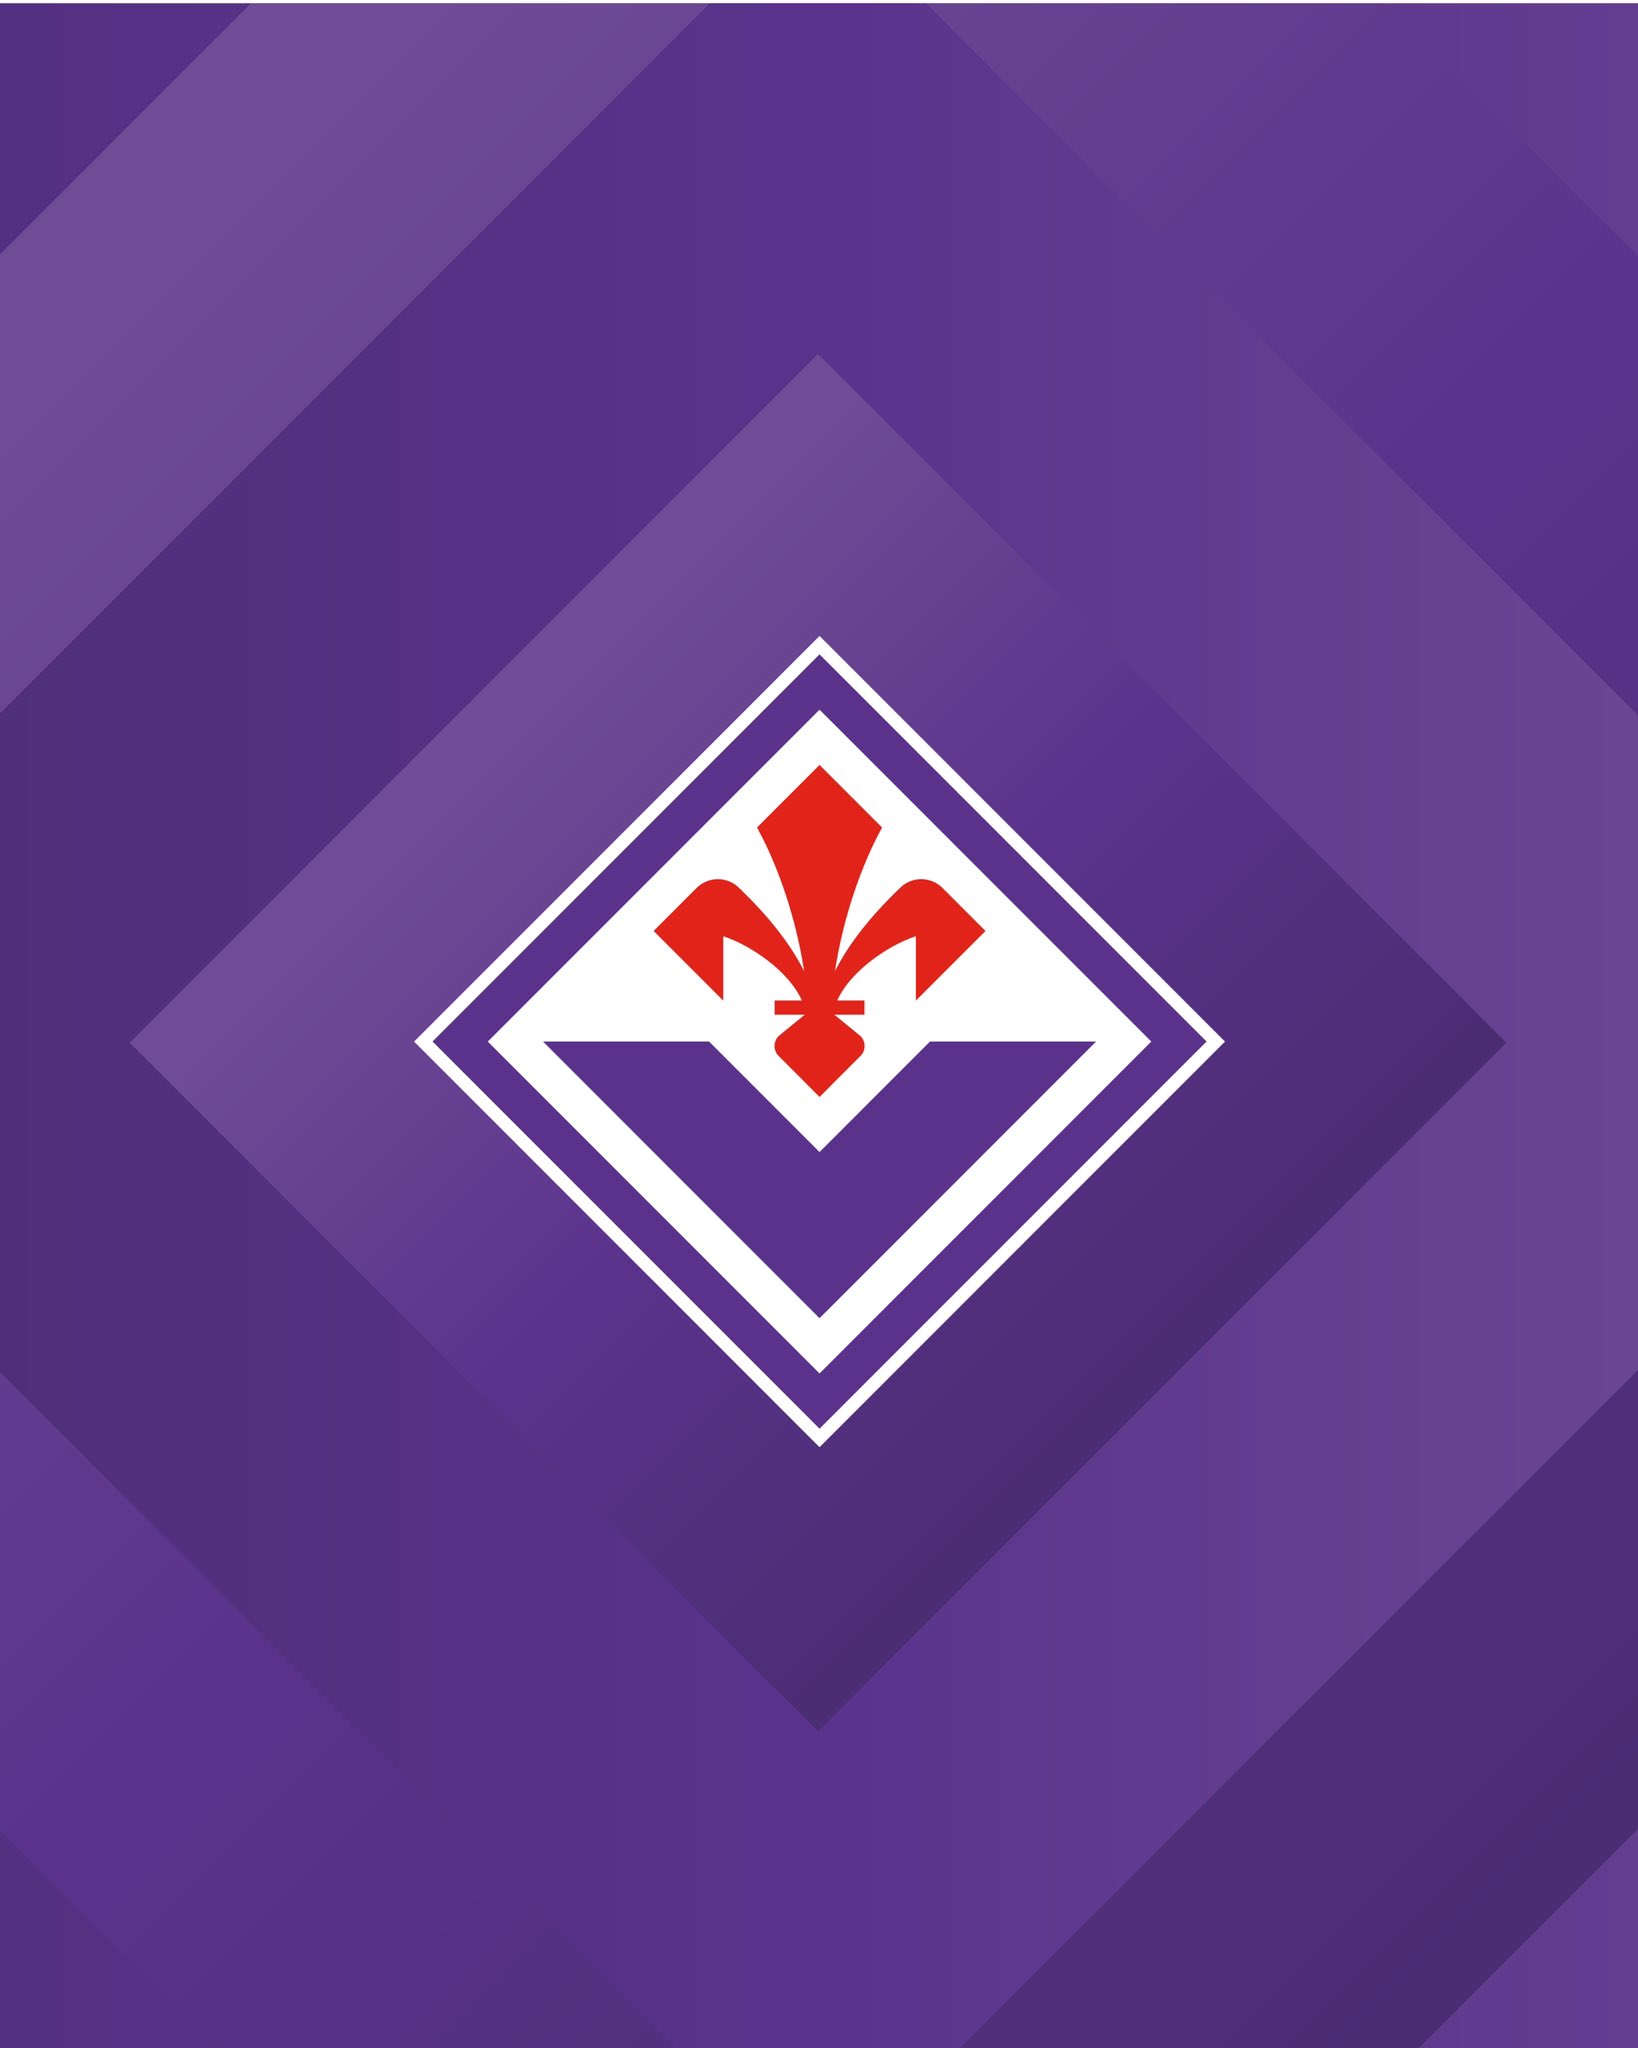 Acf Fiorentina English On Play To Be Different